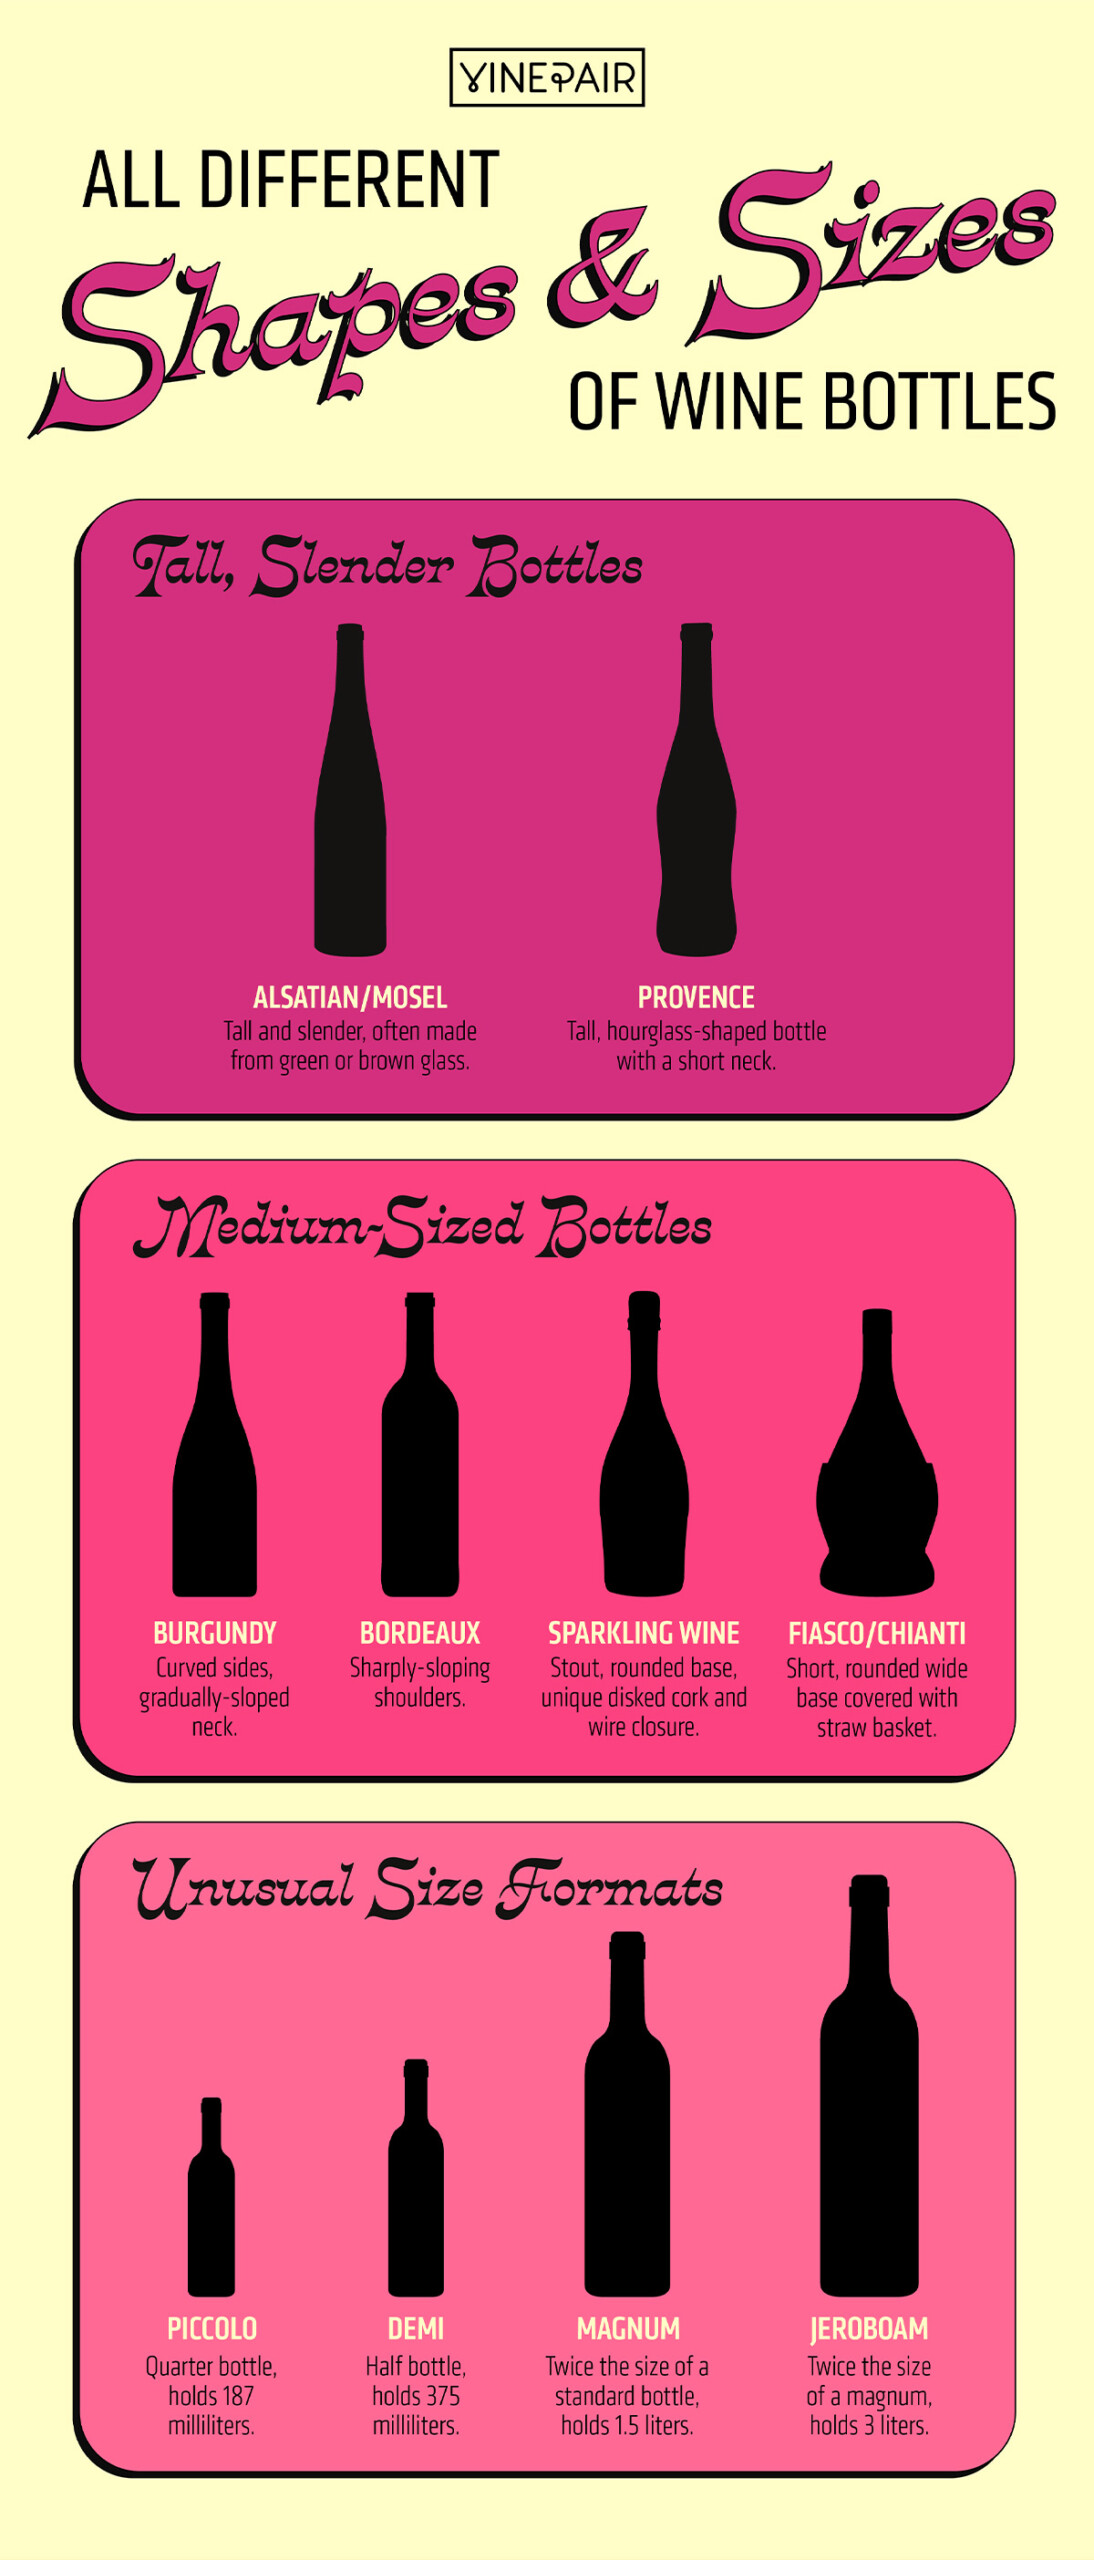 https://vinepair.com/wp-content/uploads/2023/02/different-shapes-and-sizes-of-wine-bottles-infographic-scaled.jpg